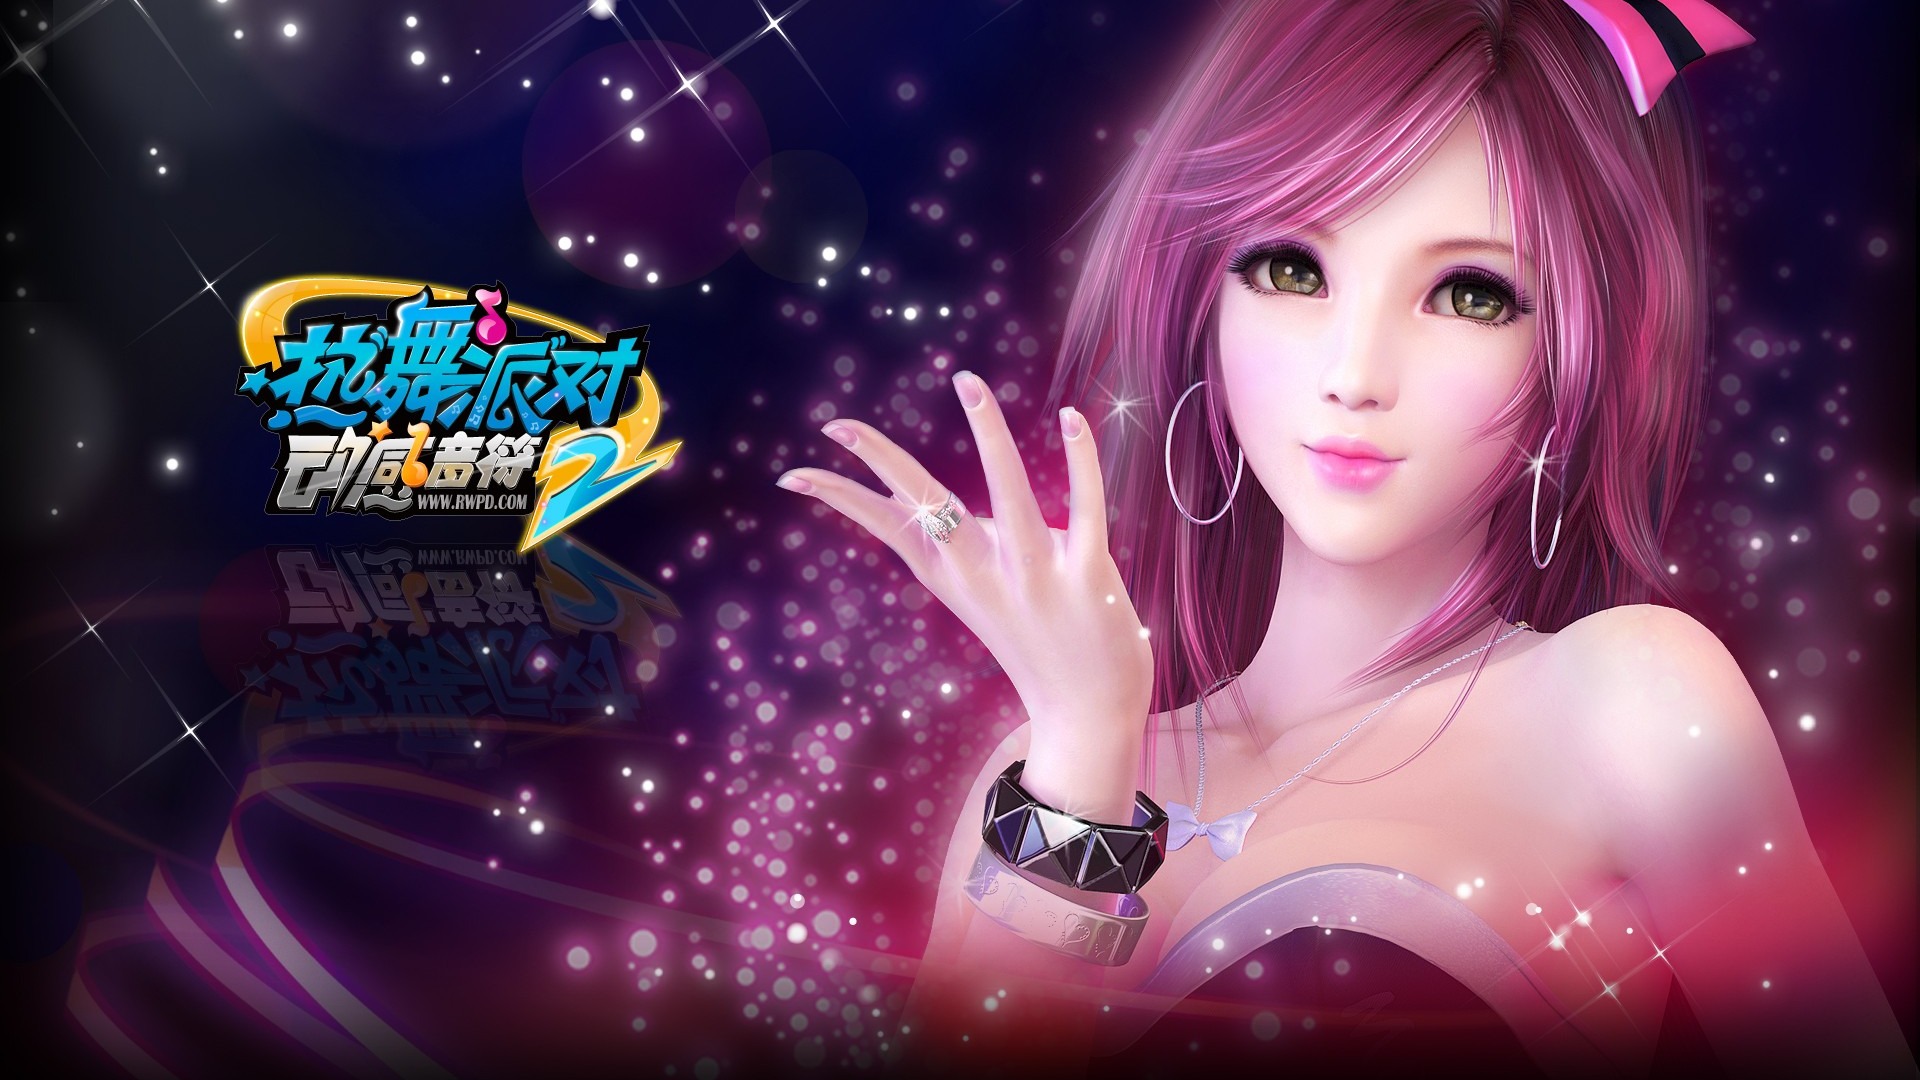 Online game Hot Dance Party II official wallpapers #26 - 1920x1080